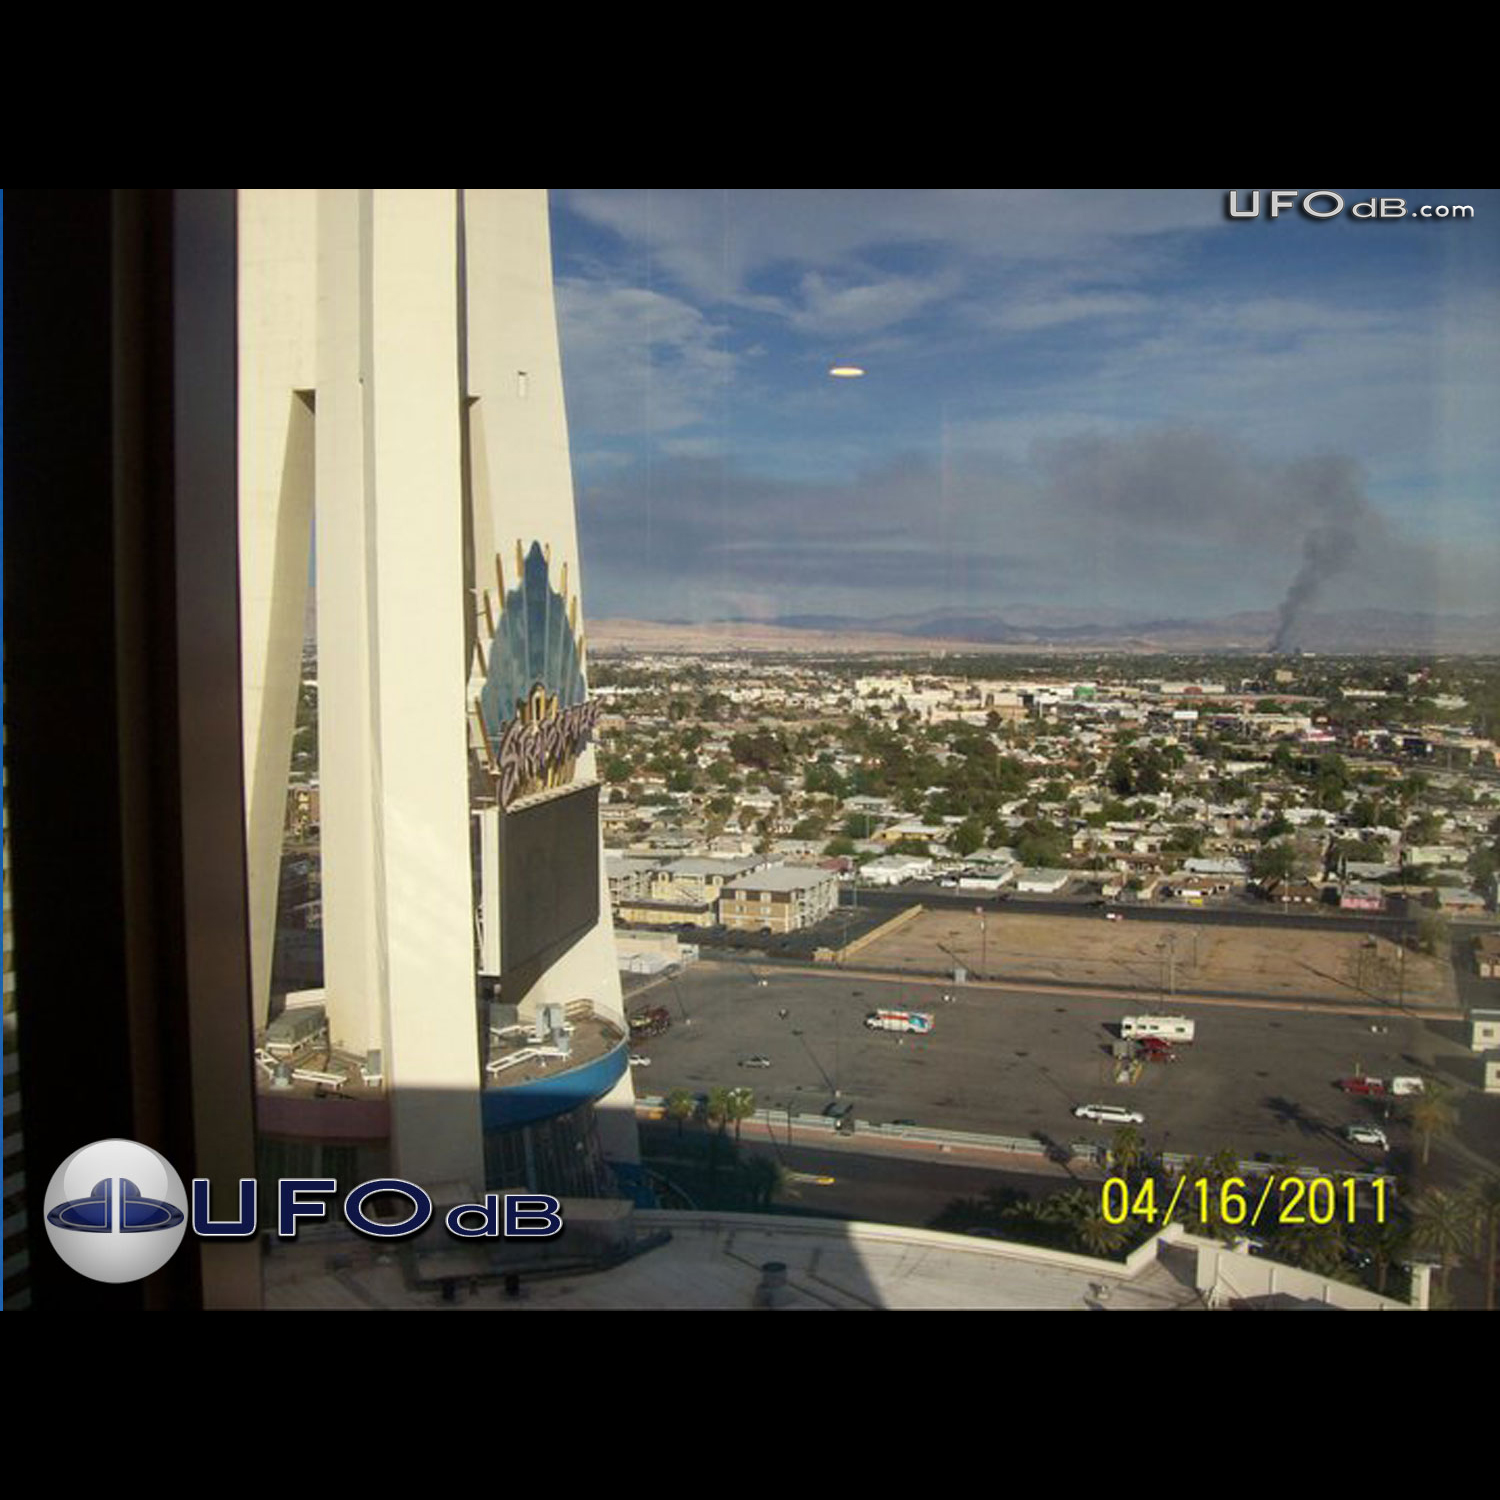 Tourist see UFO from The Stratosphere Hotel, Las Vegas | April 16 2011 UFO Picture #266-1